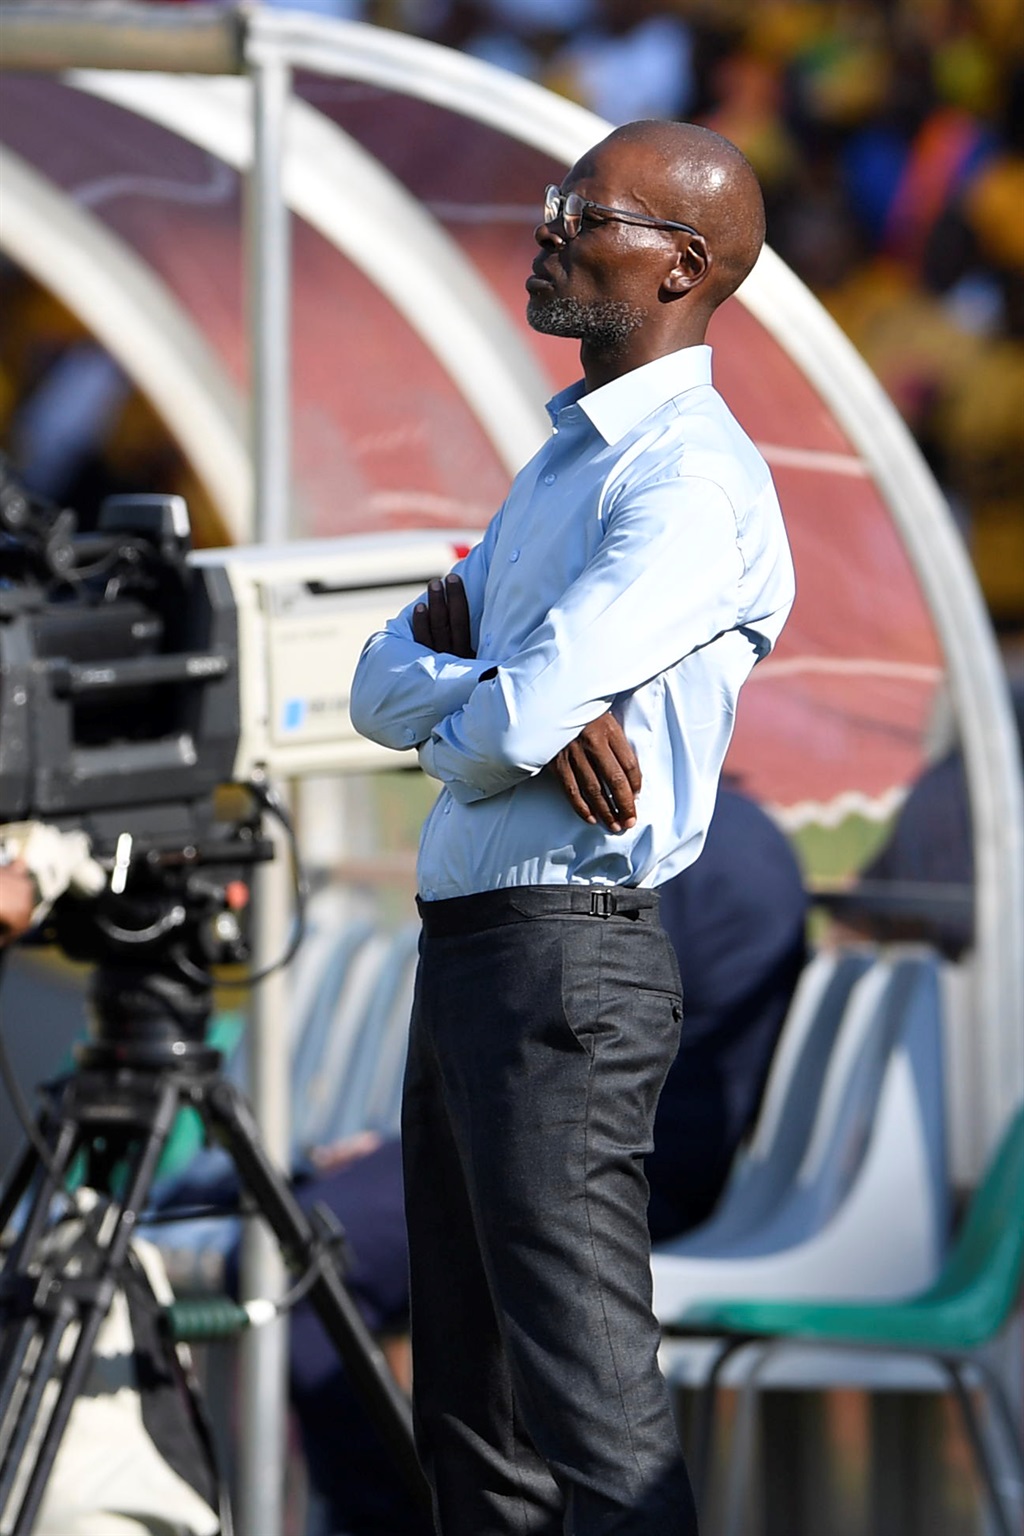 RUSTENBURG, SOUTH AFRICA - MAY 13: Kaizer Chiefs coach Arthur Zwane during the DStv Premiership match between SuperSport United and Kaizer Chiefs at Royal Bafokeng Stadium on May 13, 2023 in Rustenburg, South Africa. (Photo by Lefty Shivambu/Gallo Images)